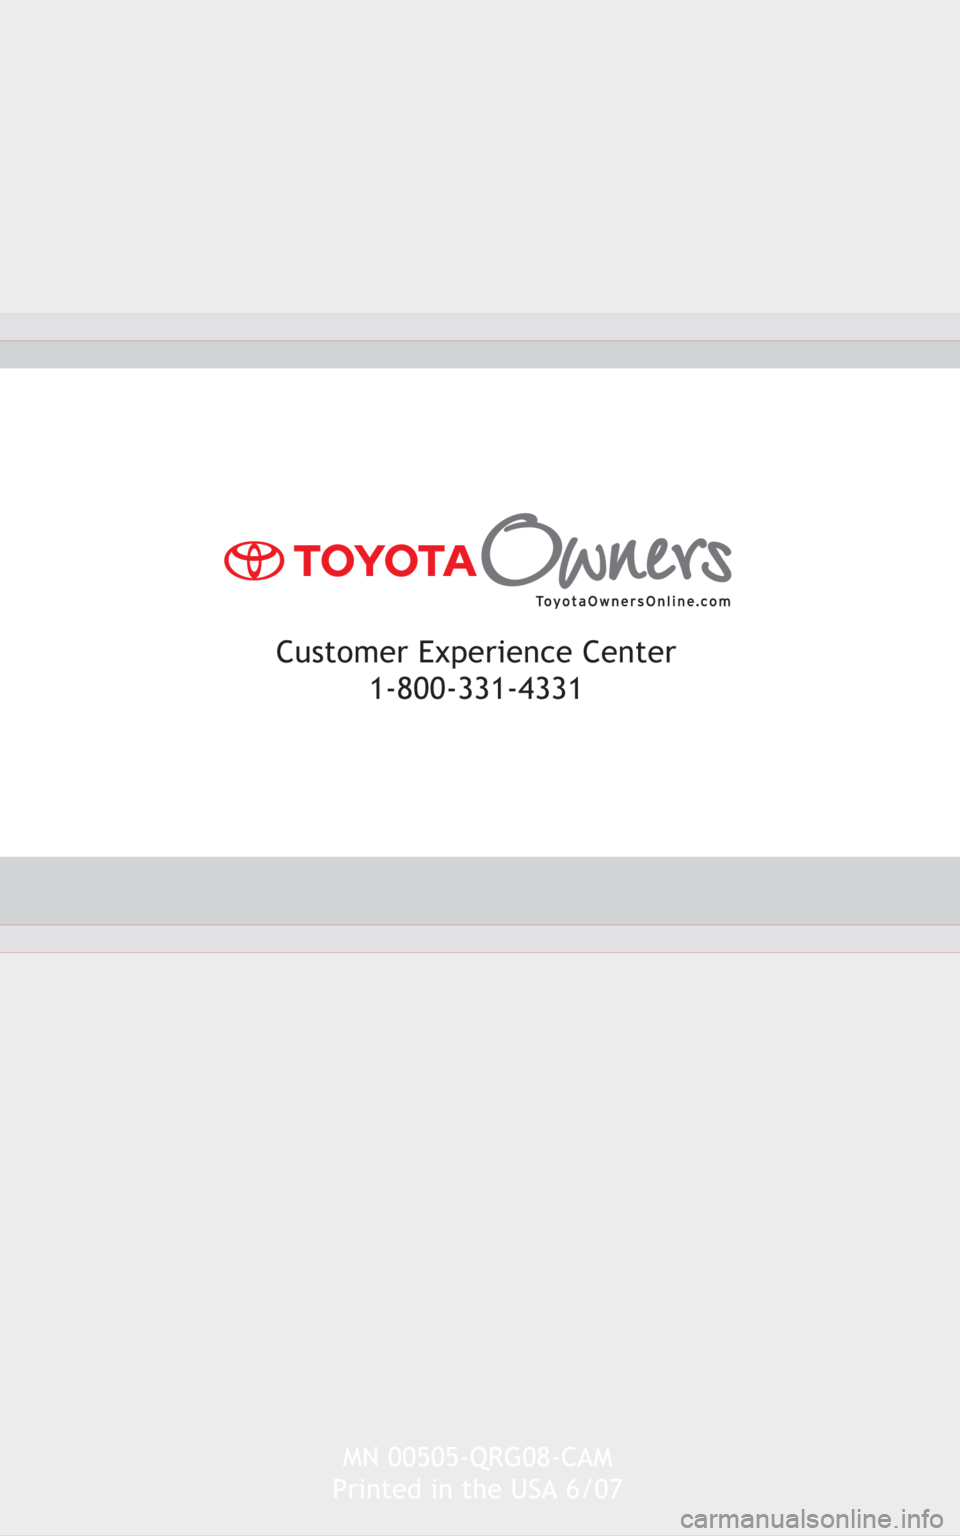 TOYOTA CAMRY 2008 XV40 / 8.G Quick Reference Guide MN 00505-QRG08-CAM
Printed in the USA 6/07
Customer Experience Center 
1-800-331-4331  